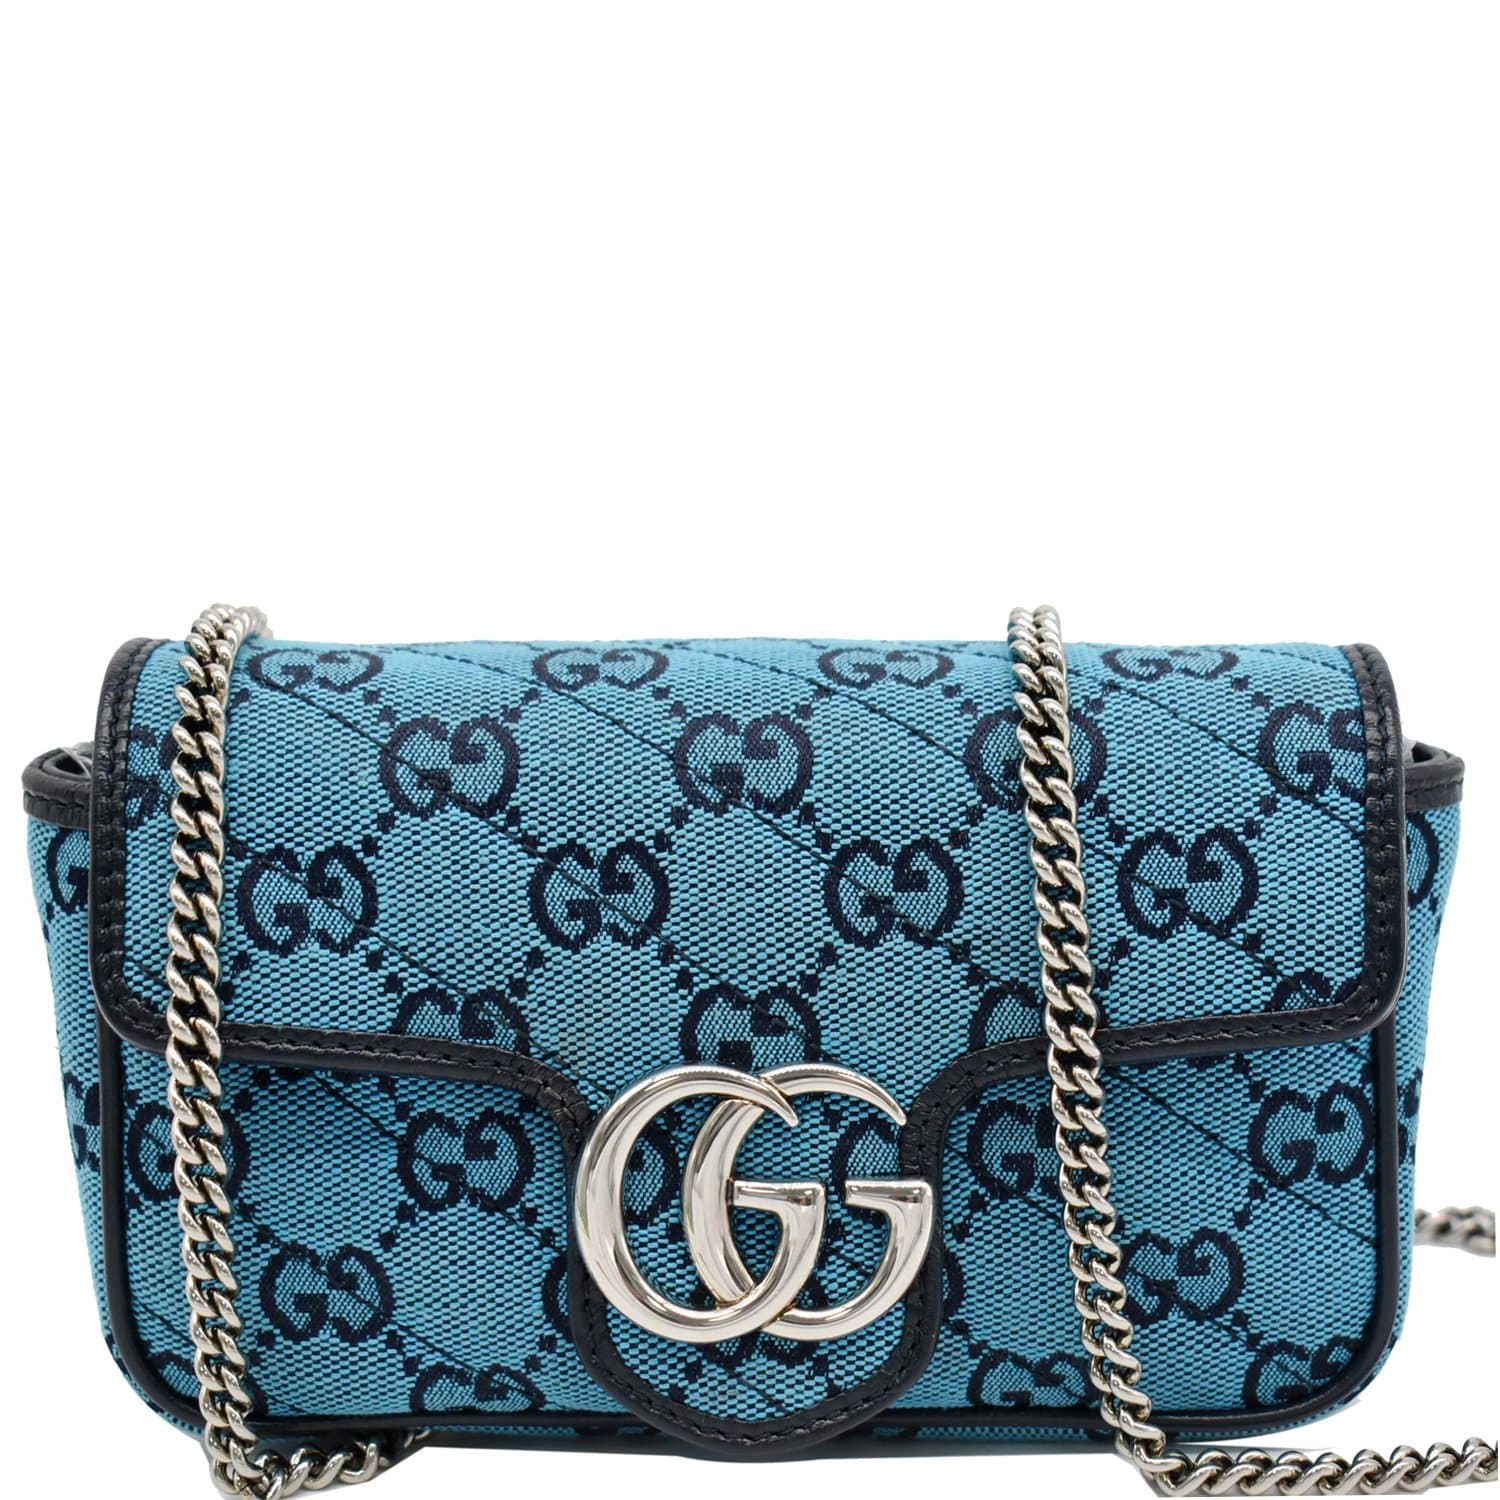 Gucci Marmont Shoulder Bag GG Small Pastel Blue in Matelasse